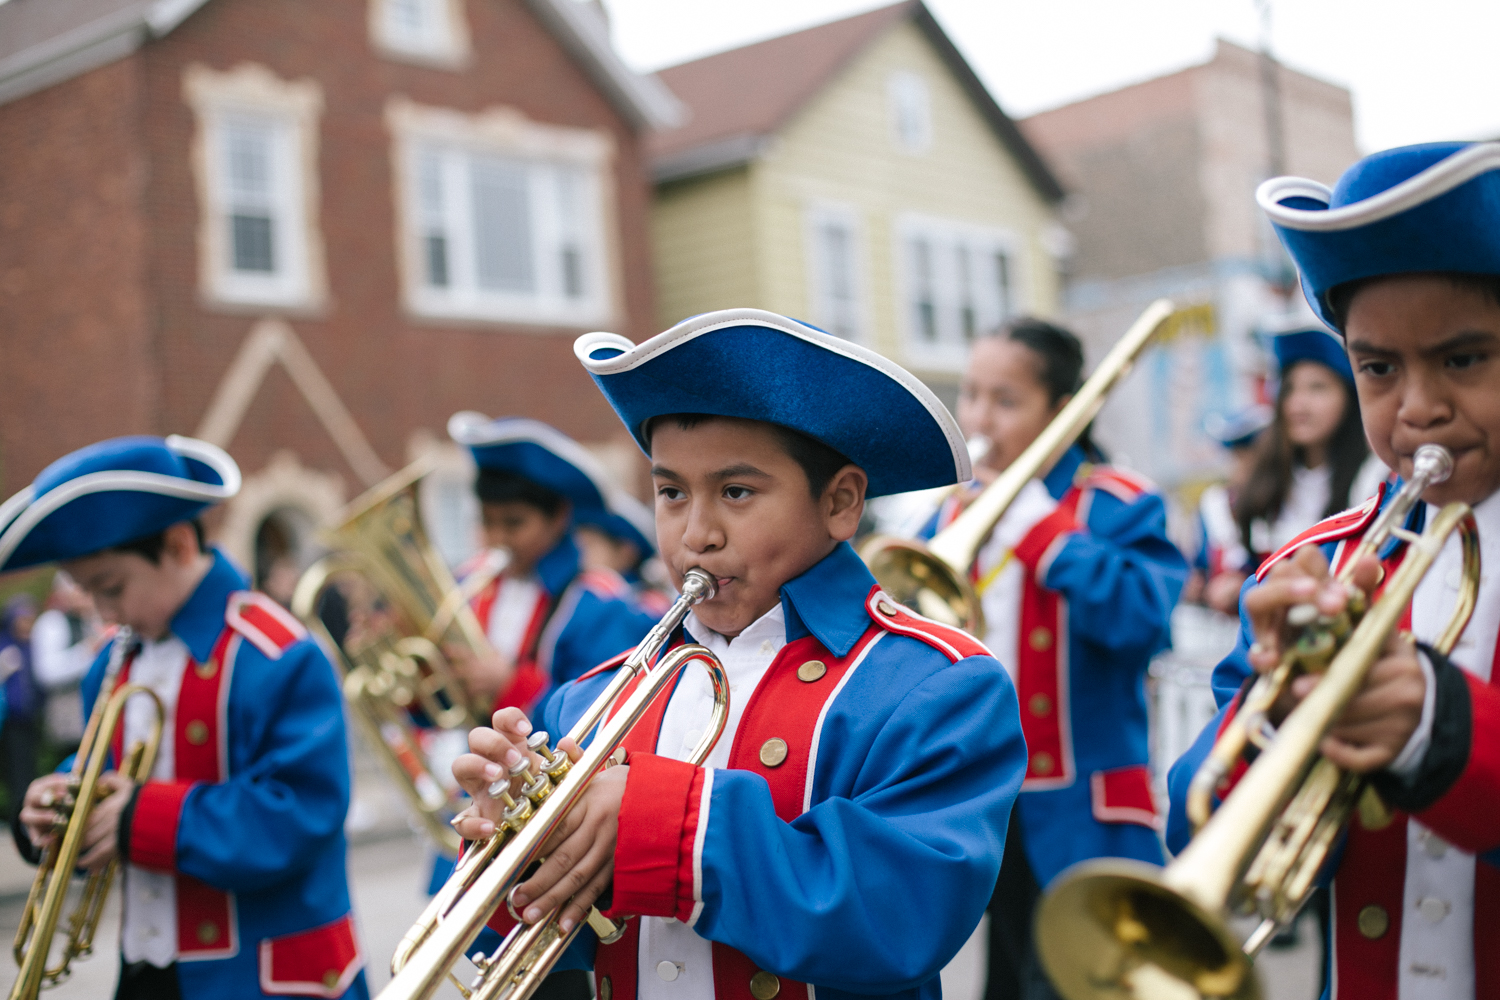  One of the trumpet players from the Tonti Elementary School Marching Band toots his horn during the Cinco de Mayo parade in the Little Village neighborhood. 4/24 